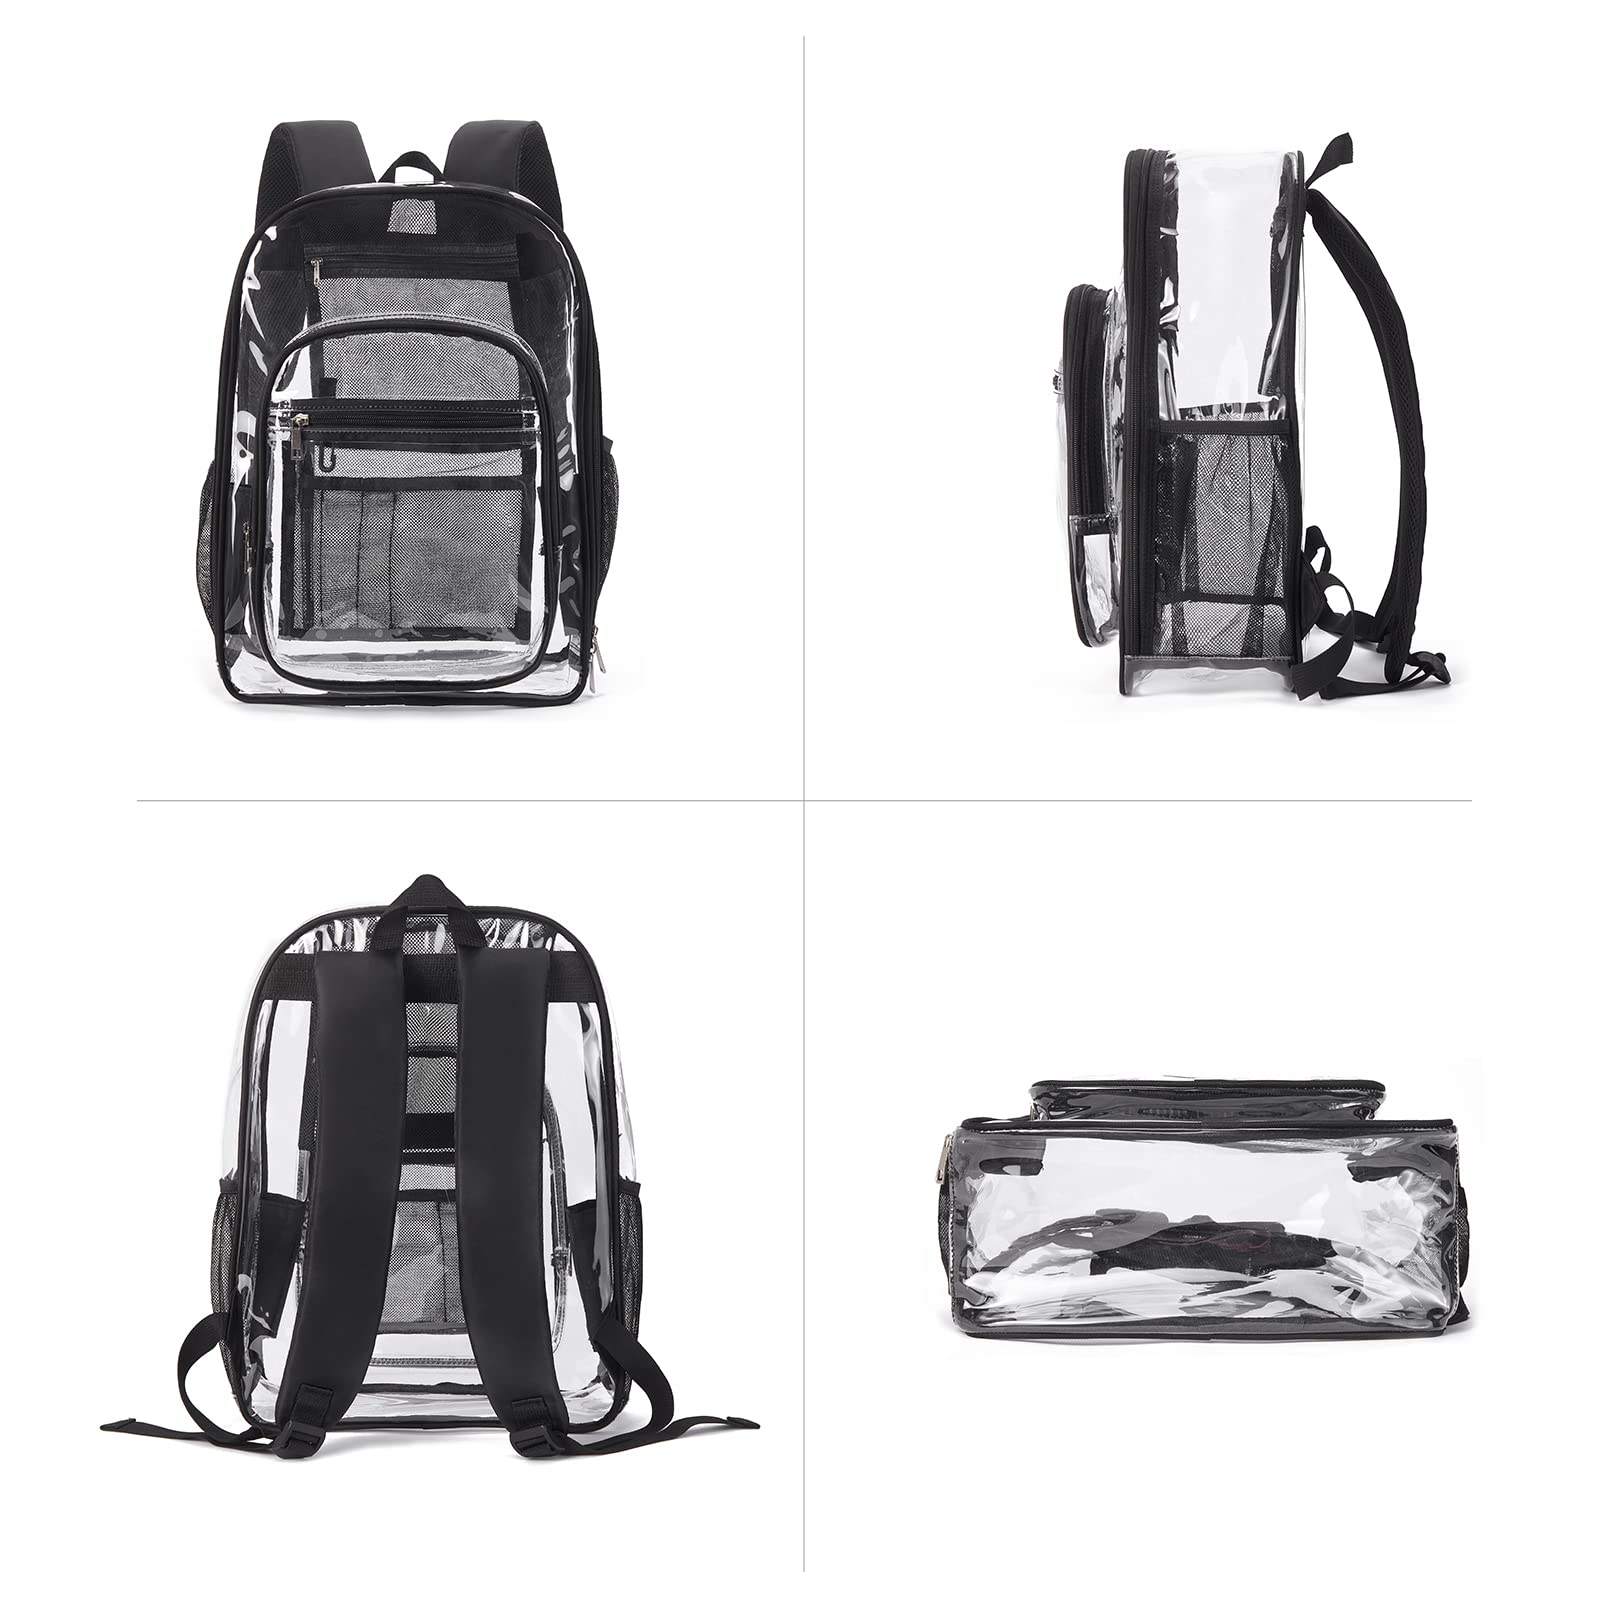 Telena Clear Backpack, Heavy Duty PVC See Through Bookbag Transparent Backpack for School